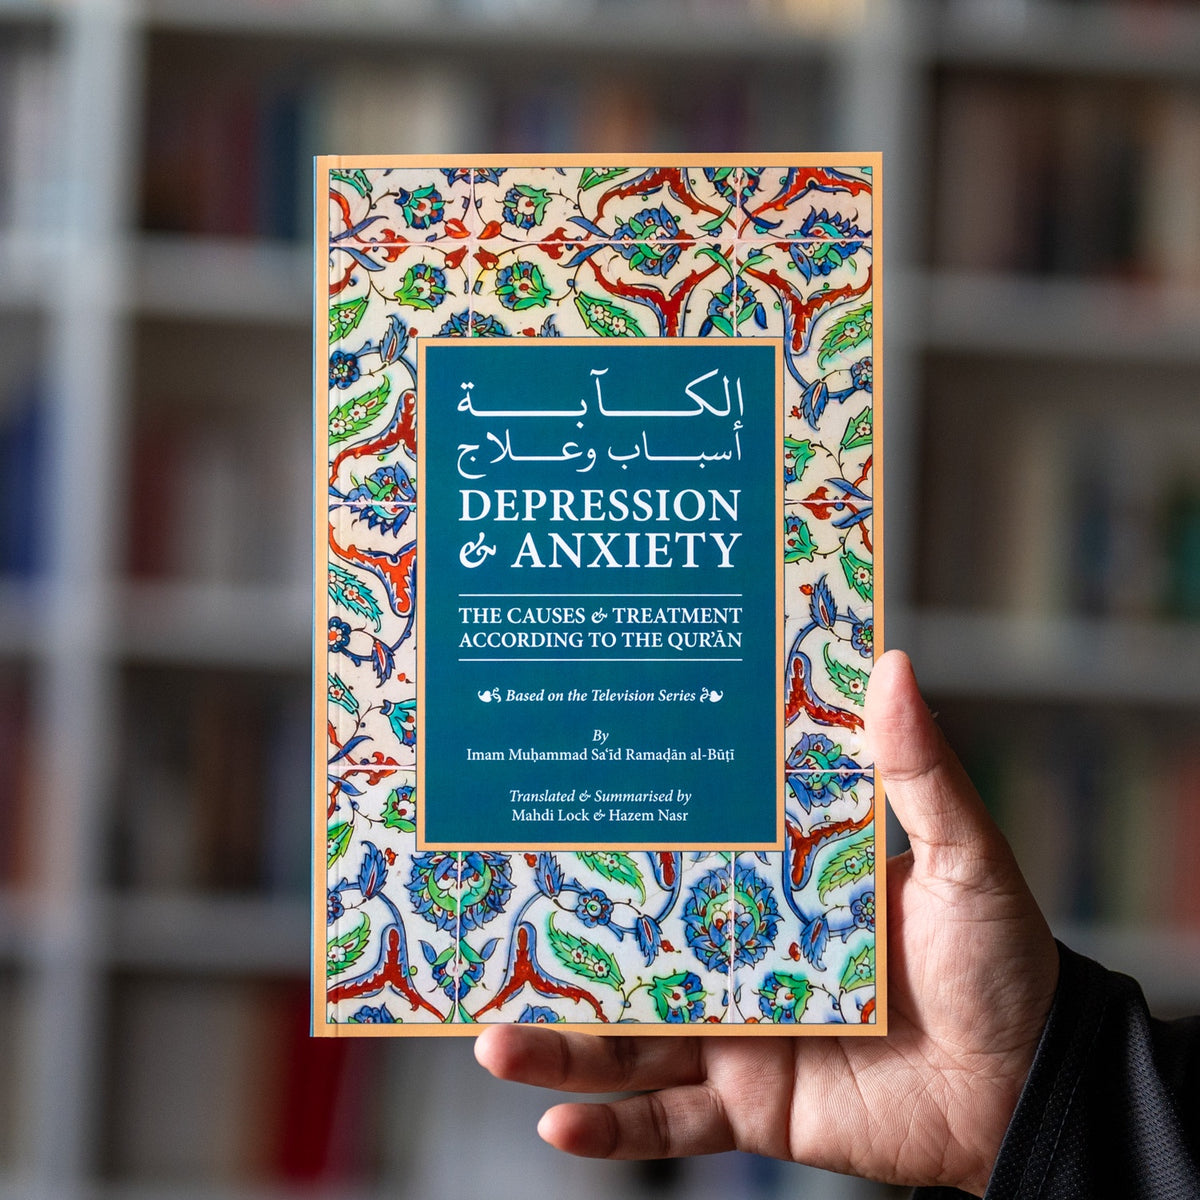 The　Treatment　Depression　Quran　Wardah　According　to　Anxiety:　—　Books　Causes　the